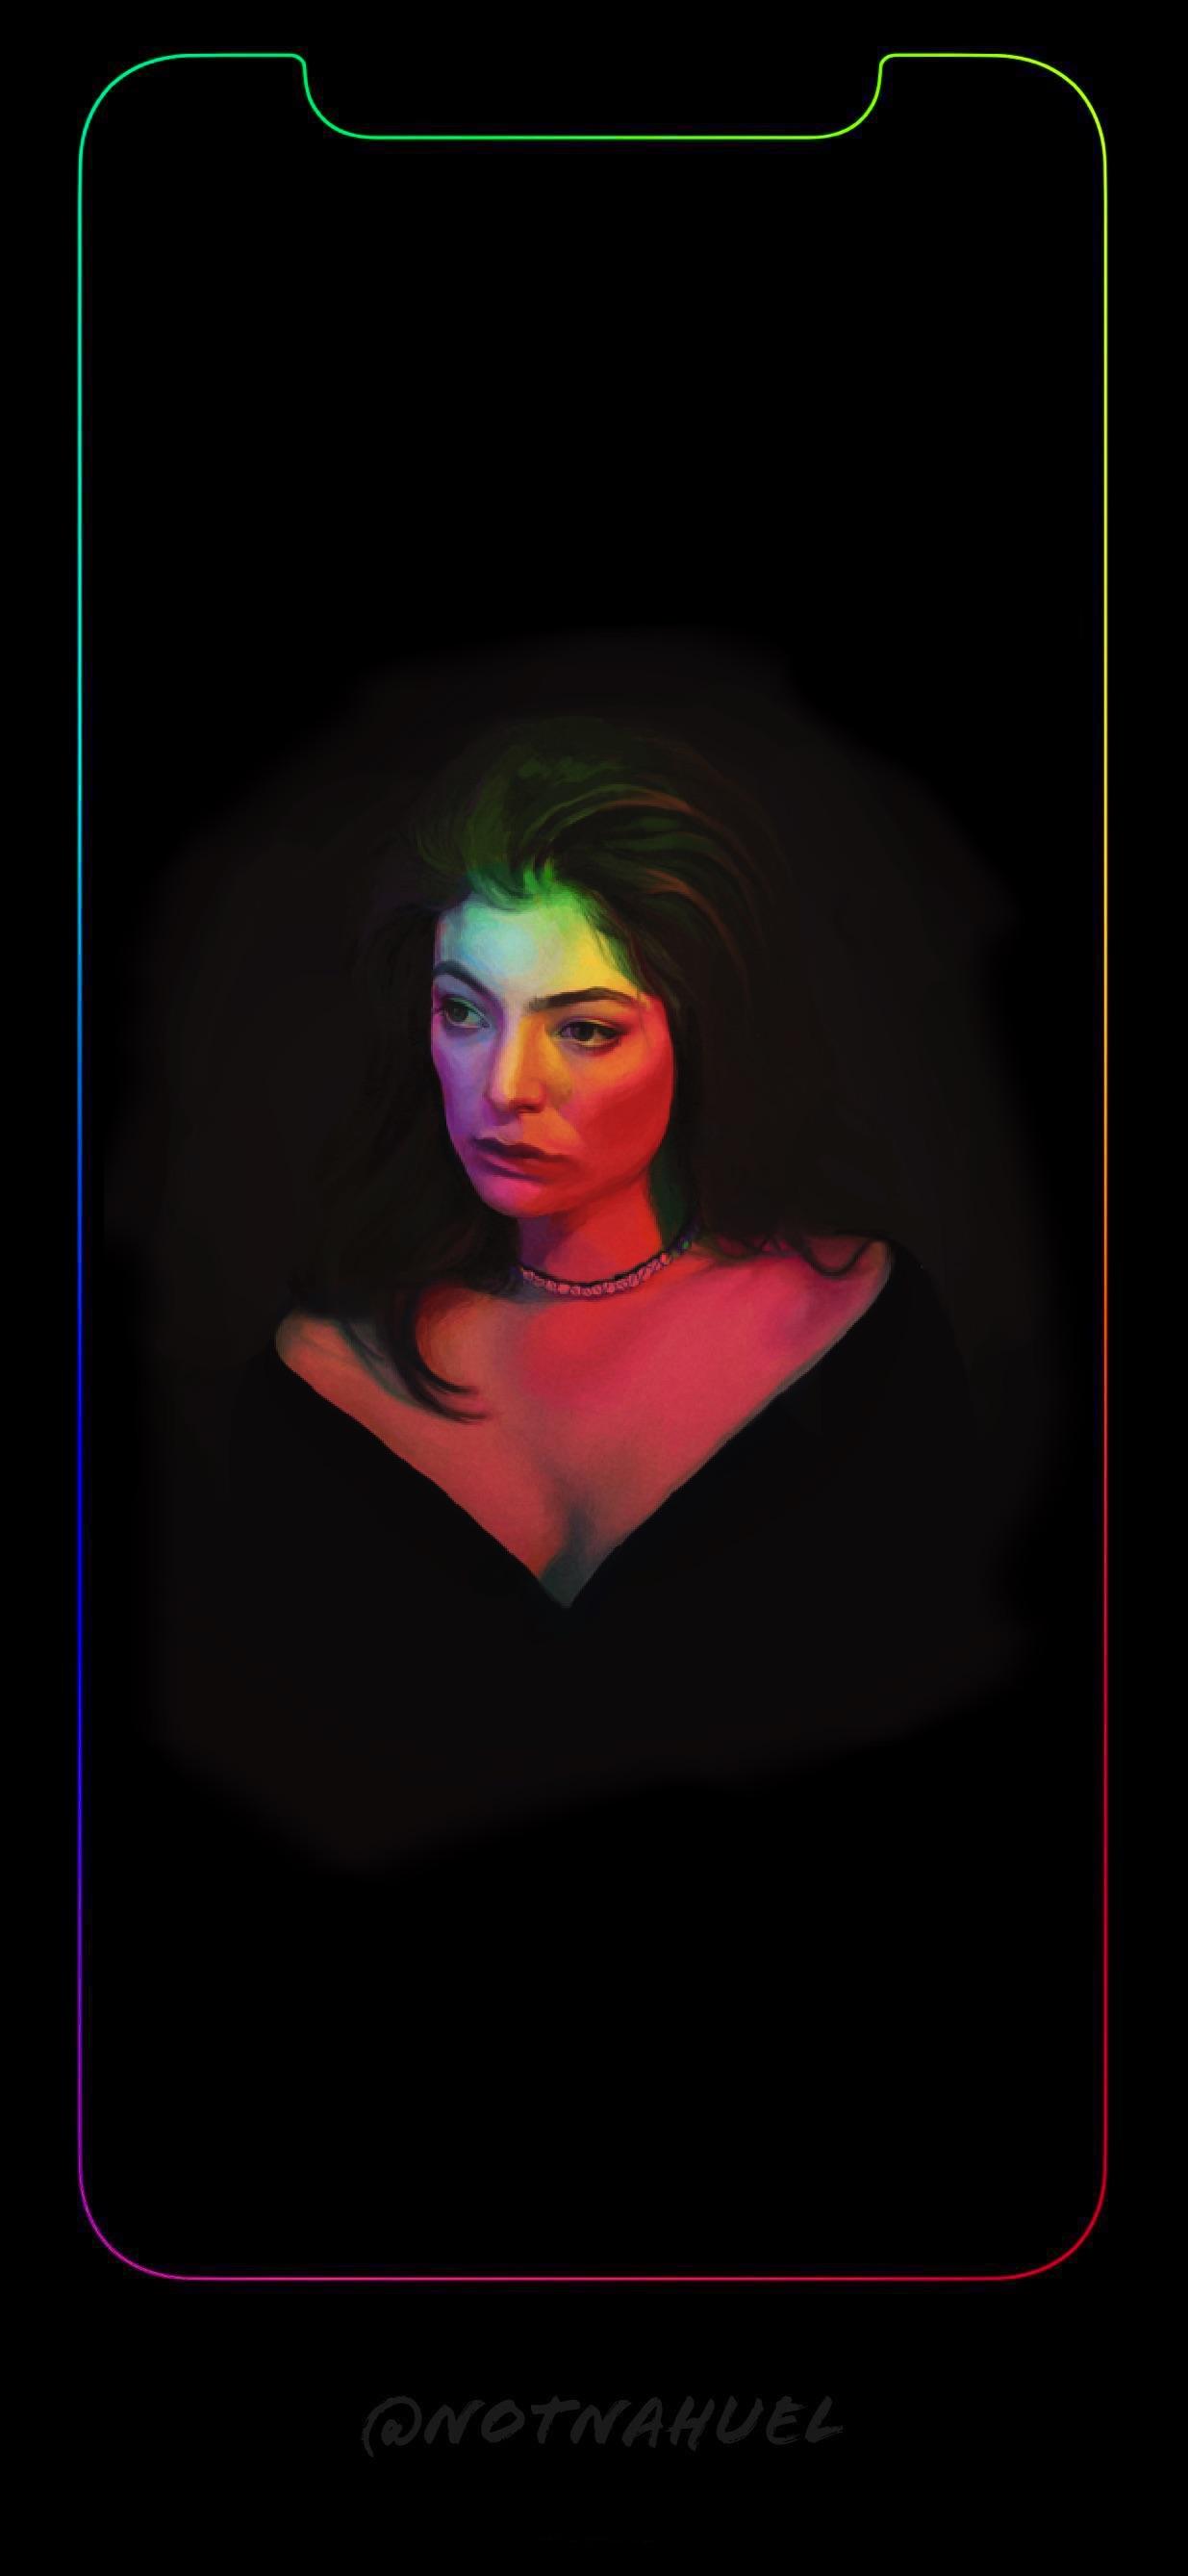 lorde melodrama wallpapers wallpaper cave on lorde melodrama wallpapers